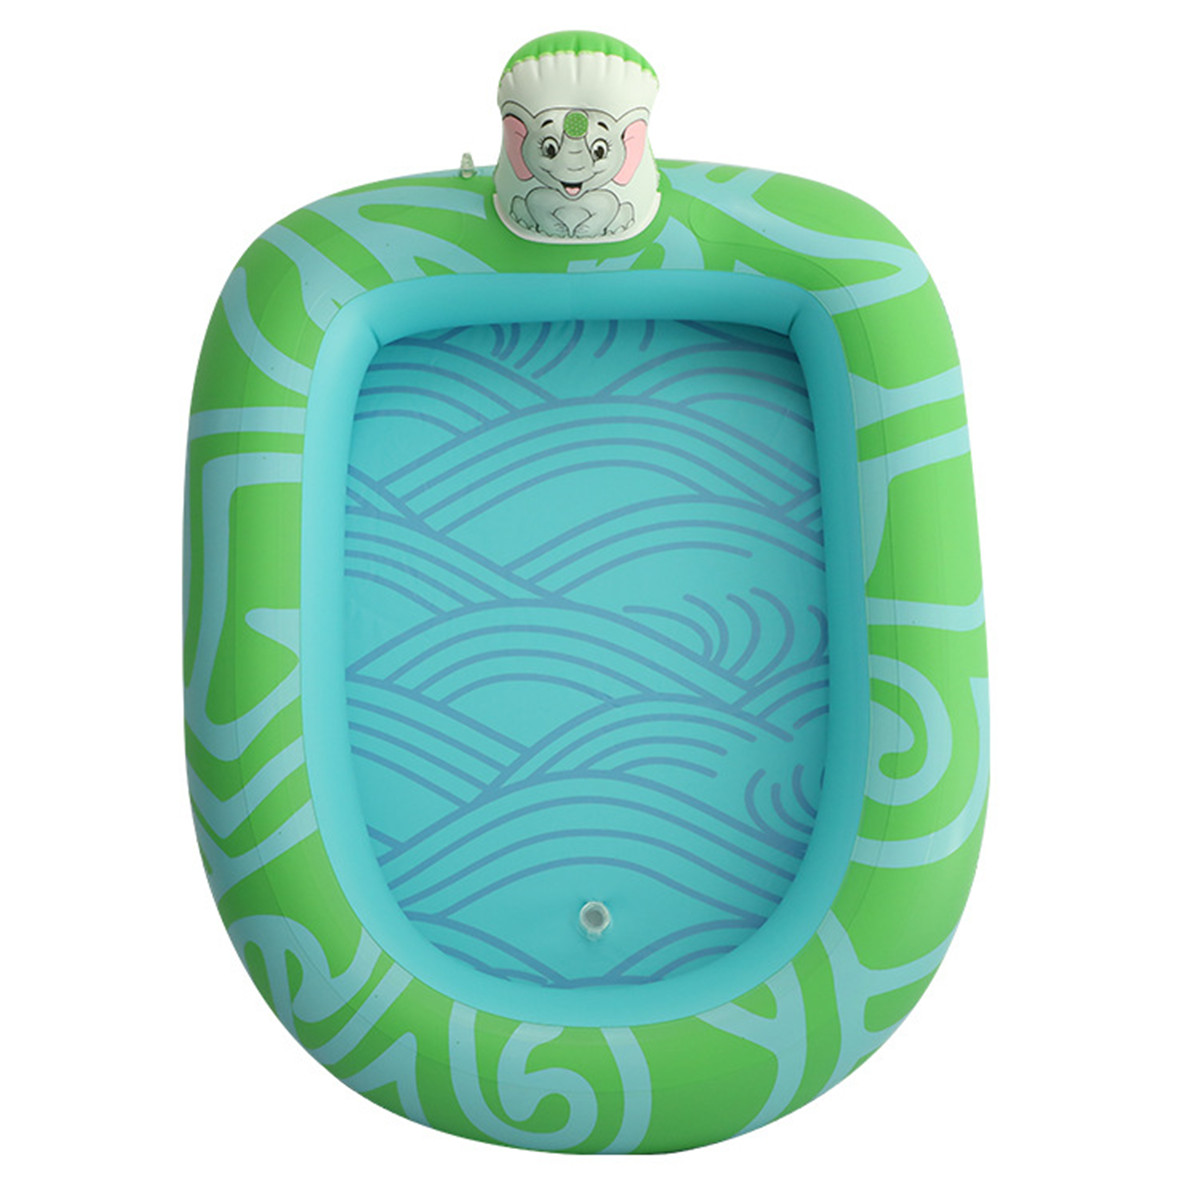 PVC-Children-Inflatable-Swimming-Pool-Sprinkler-Pool-Thickened-Cartoon-Pattern-Outdoor-Swimming-Wate-1851764-16